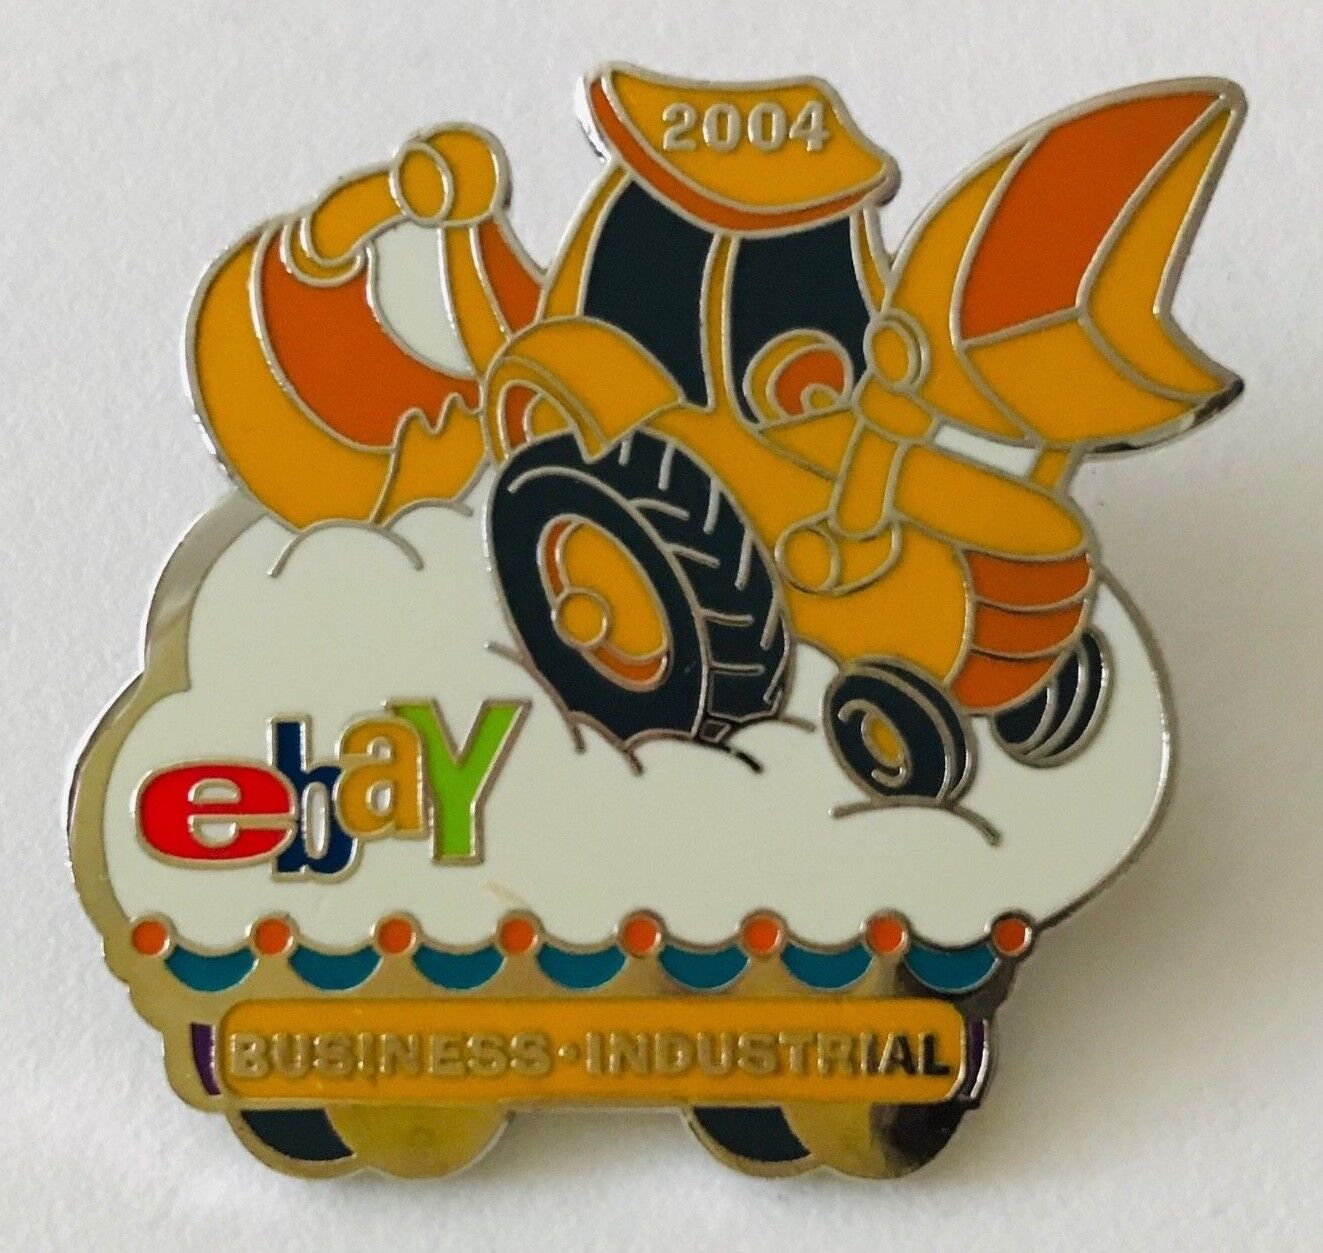 Ebay Live 2004 Lapel Pin Business & Industrial Category Ebayan...